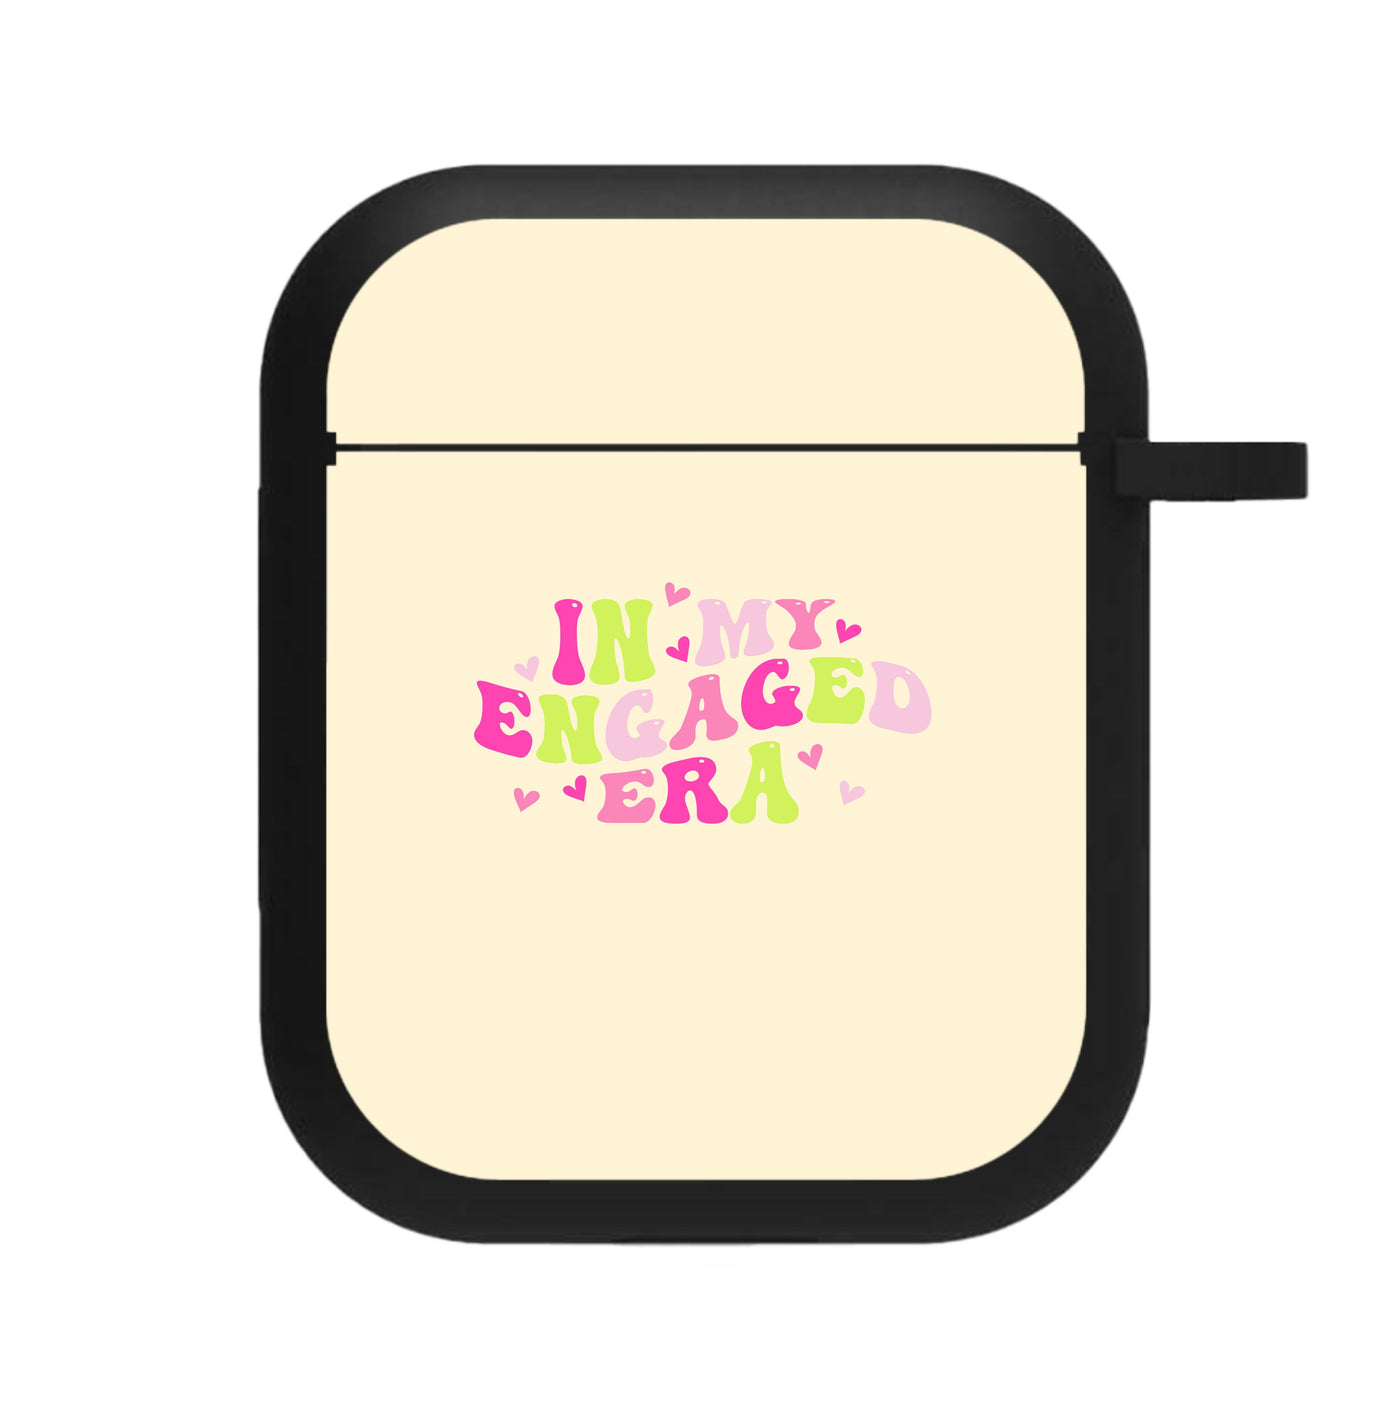 In My Engaged Era - Bridal AirPods Case